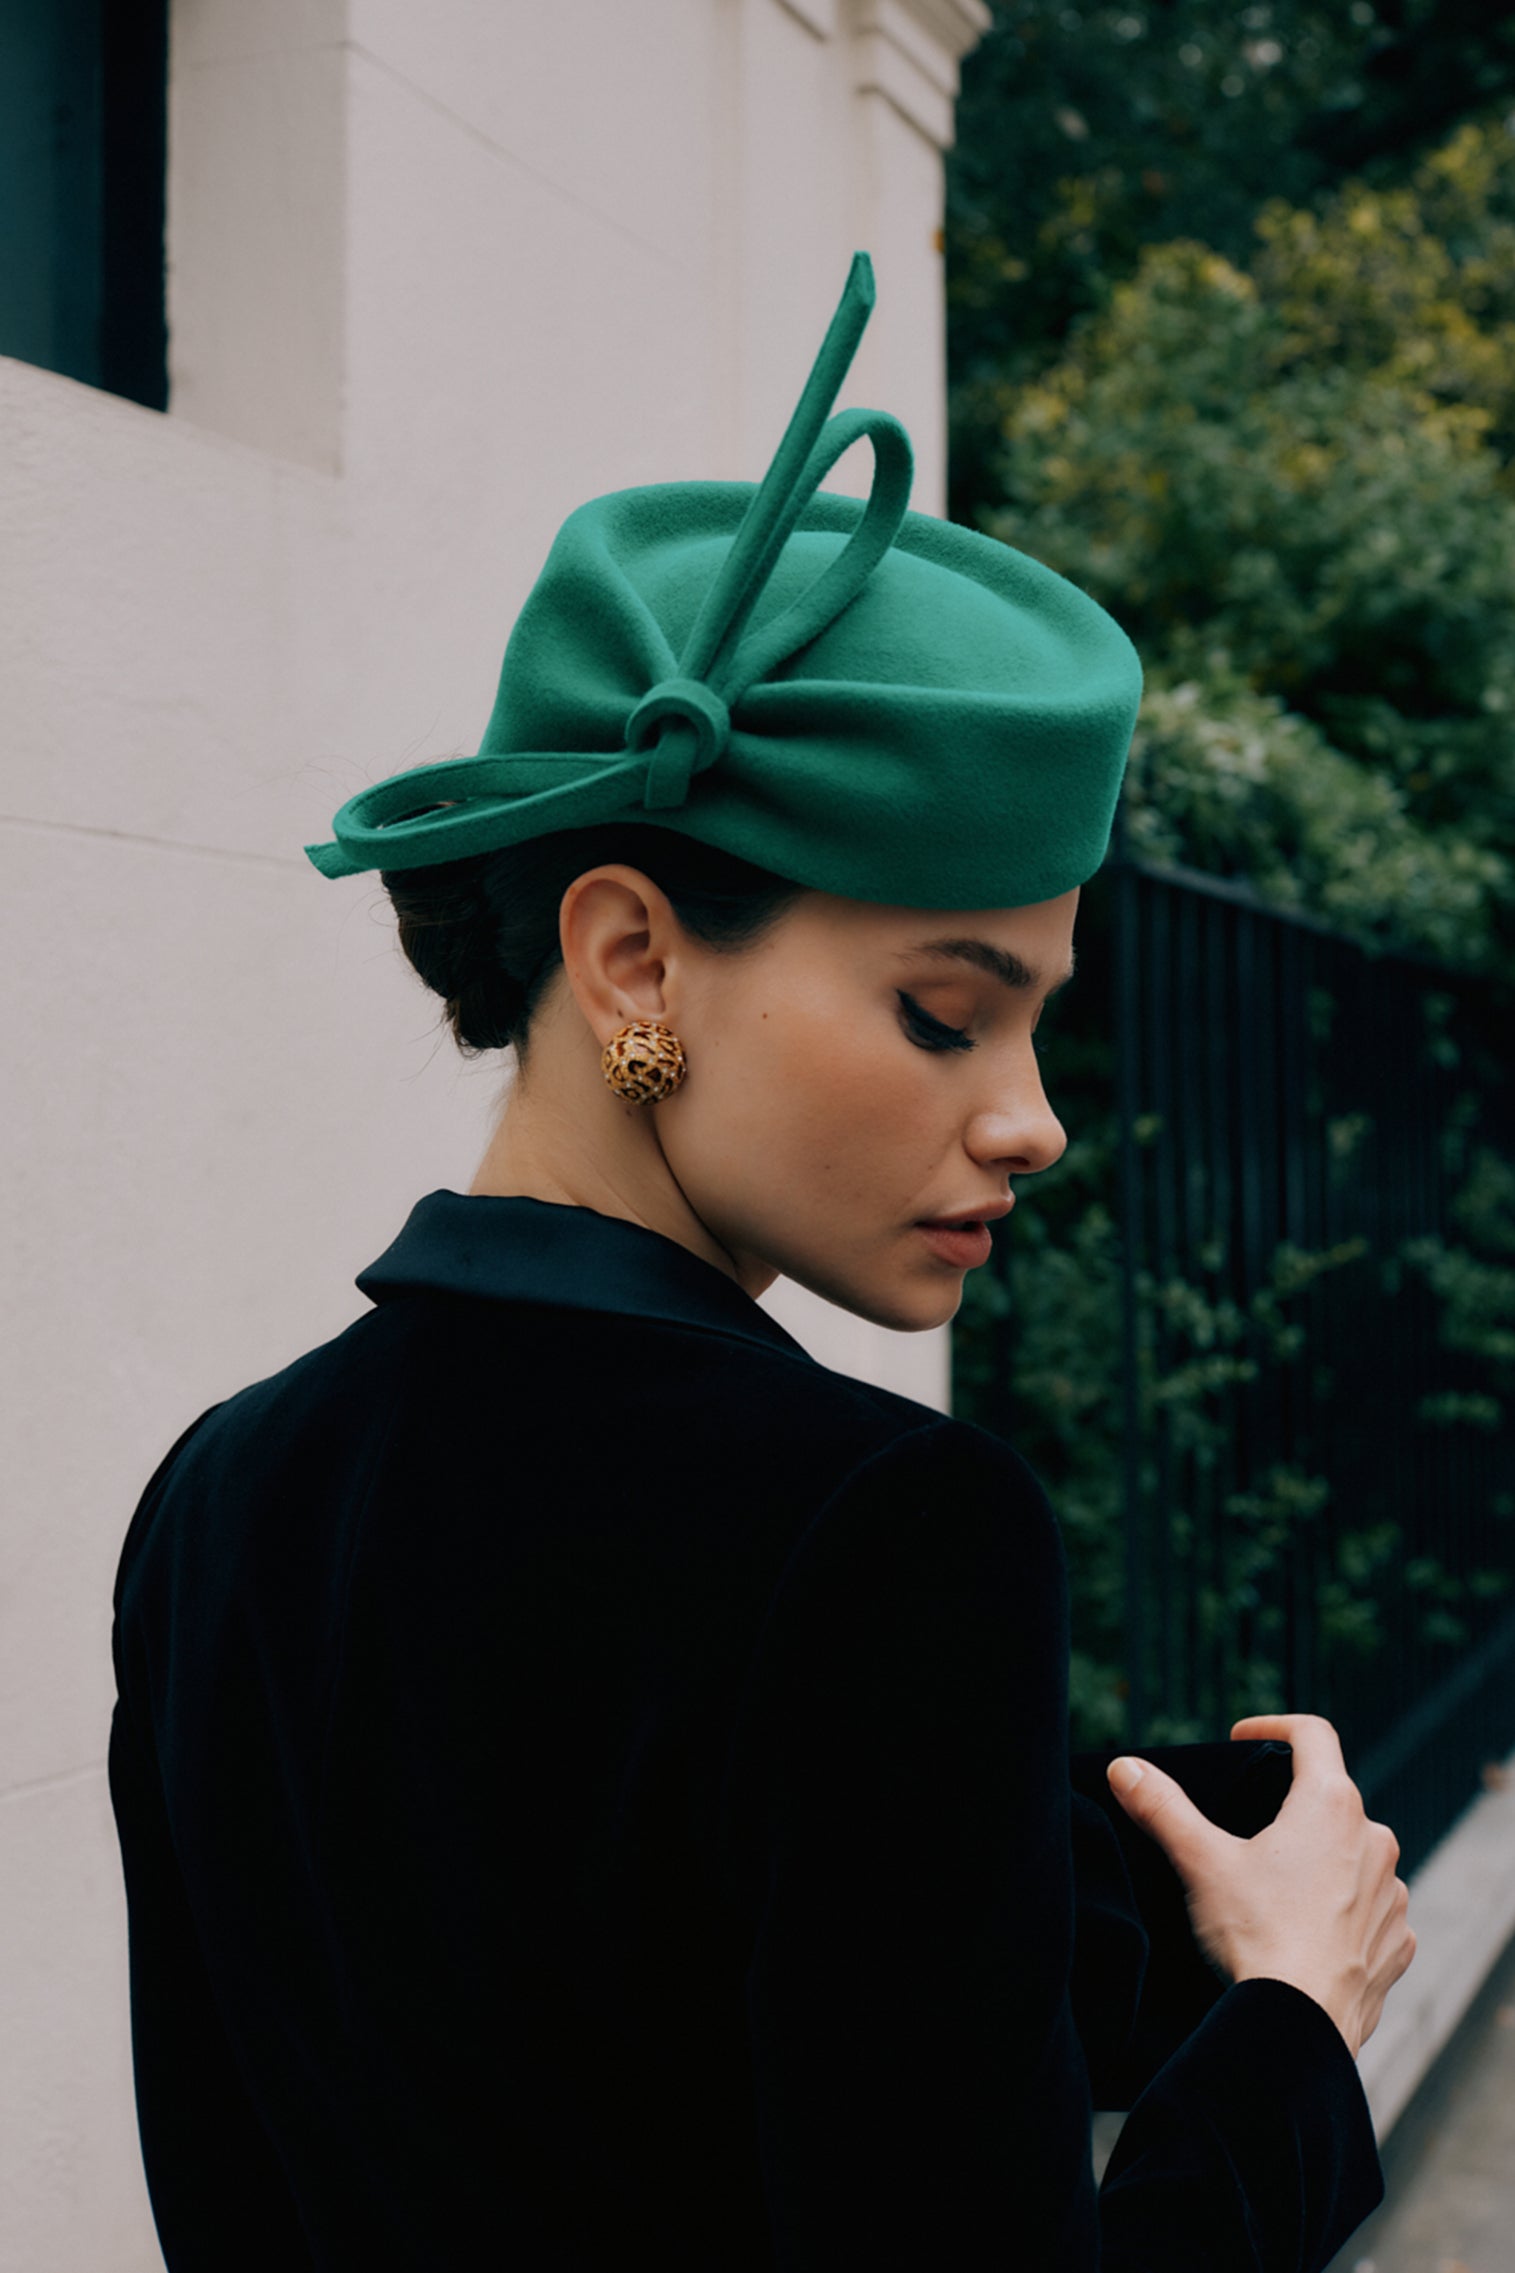 Mayfair Pillbox Hat - Lock Couture by Awon Golding - Lock & Co. Hatters London UK